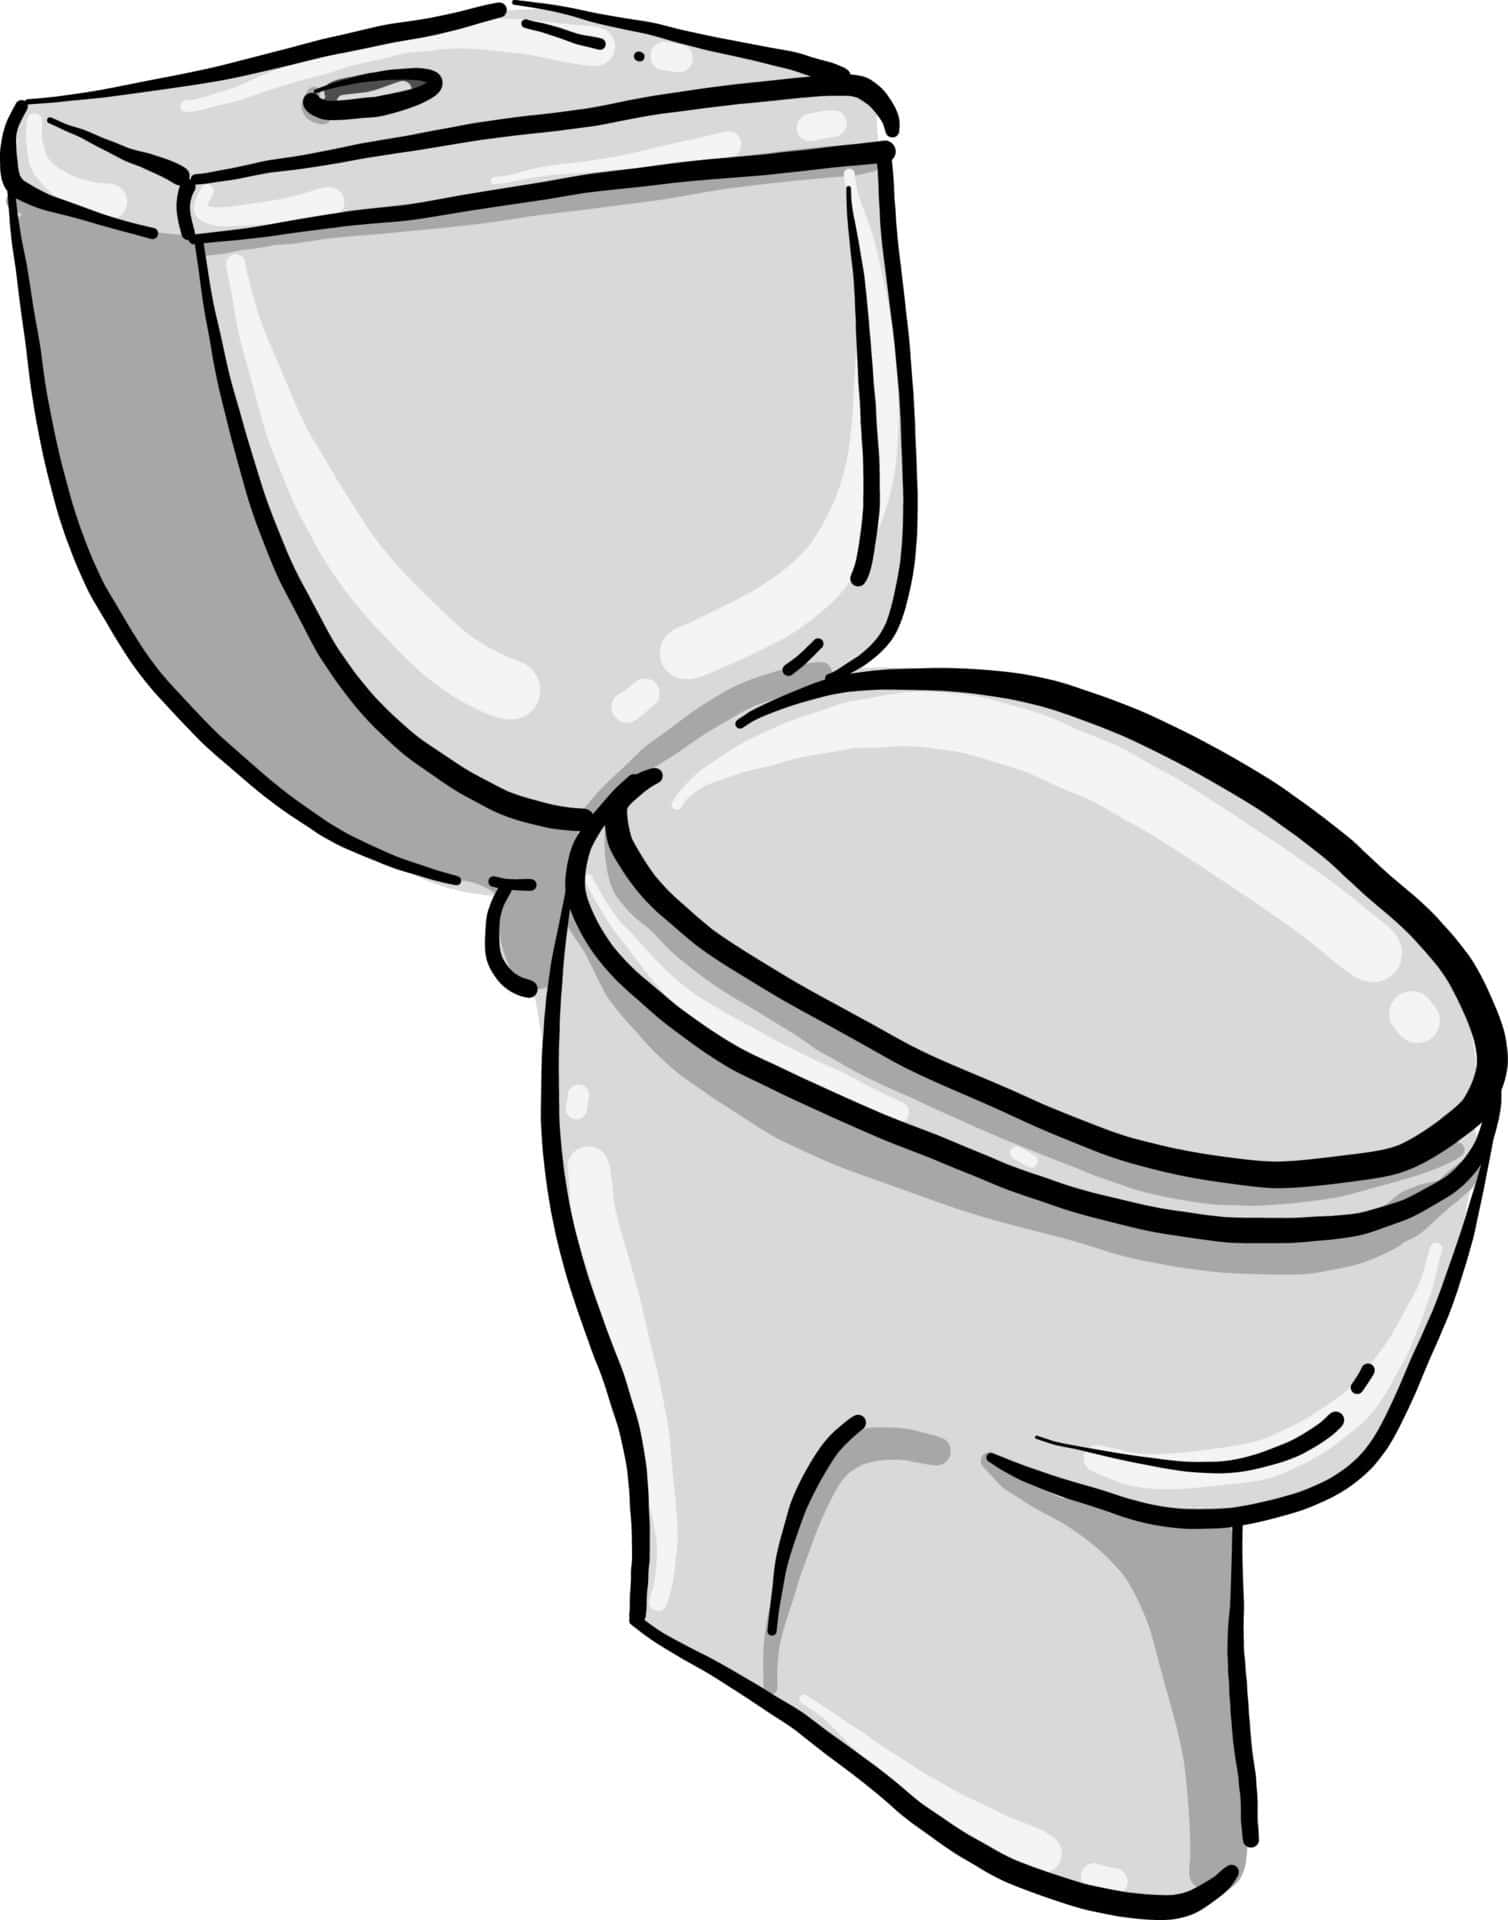 A Cartoon Toilet With The Lid Open